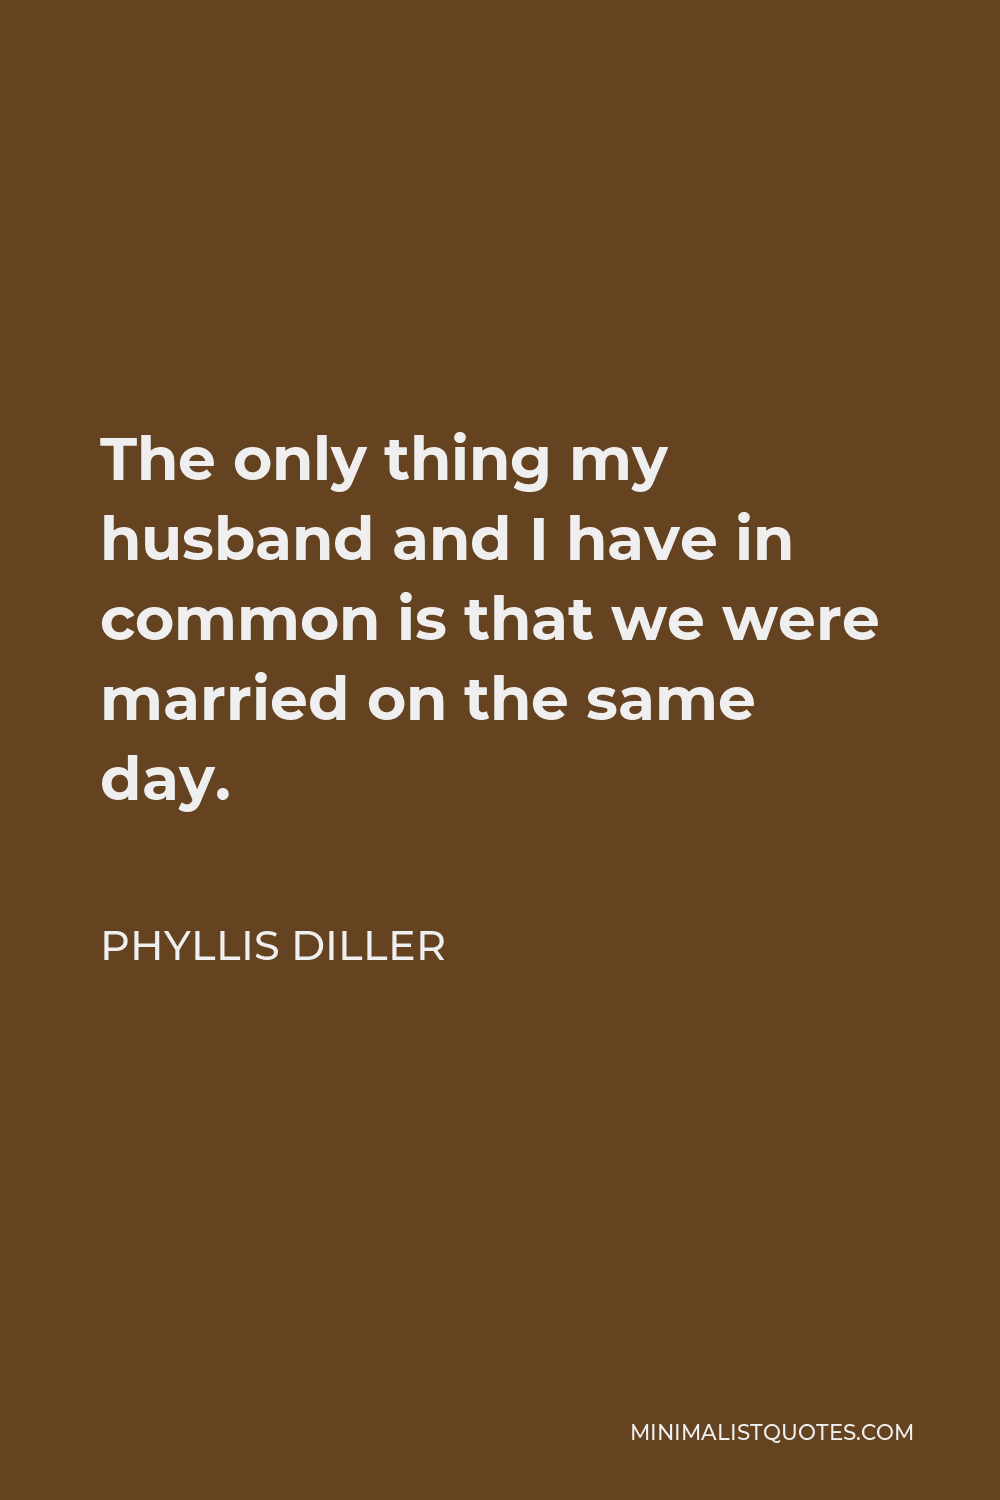 Phyllis Diller Quote - The only thing my husband and I have in common is that we were married on the same day.